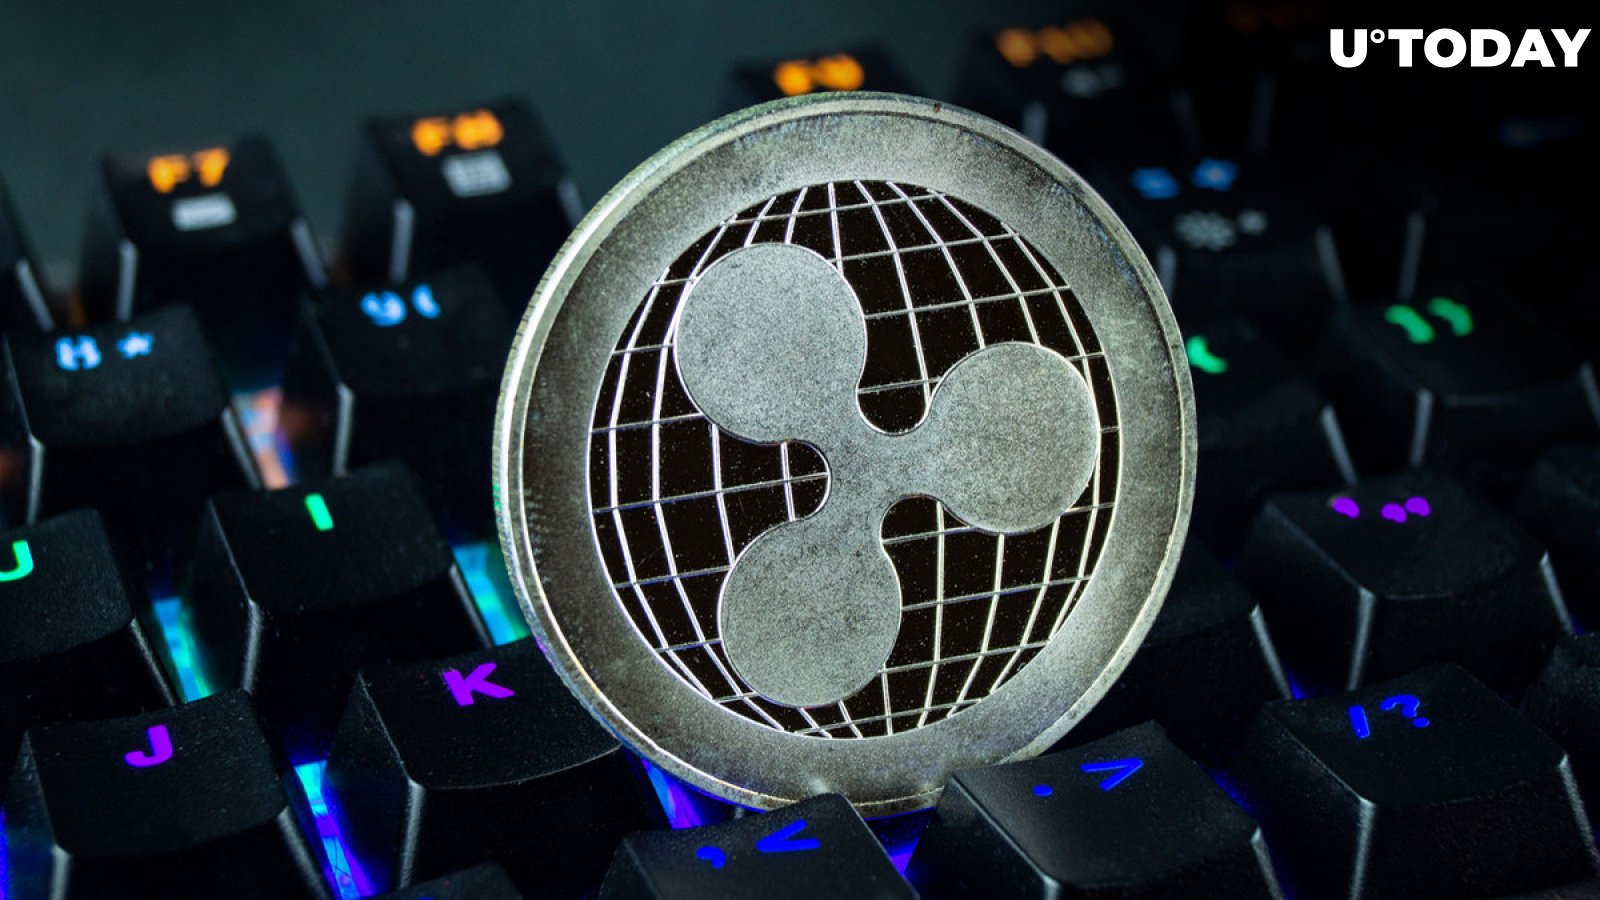 Ripple, Strengthened by Two Recent Partnerships, Can Now Tokenize Real World Assets: Influencer